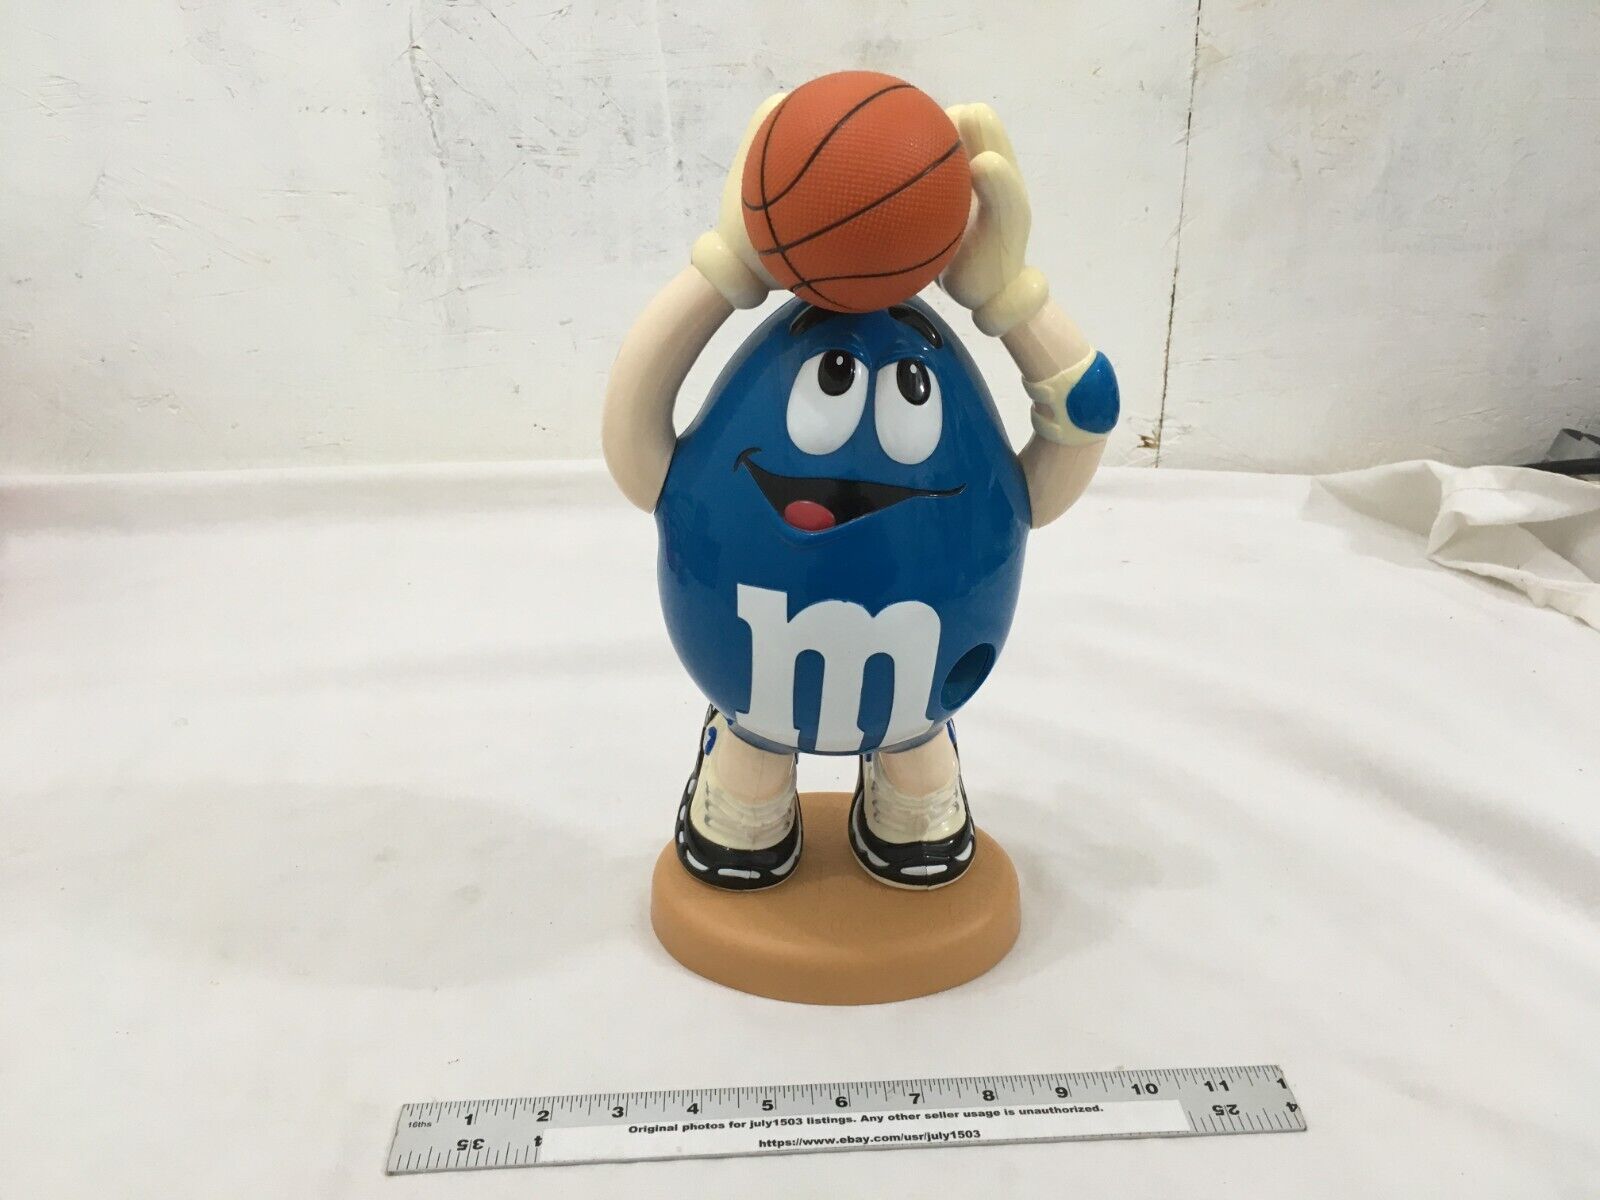 (1) USED M&M Candy Dispenser - Blue Peanut as Basketball Player, Arms Raised